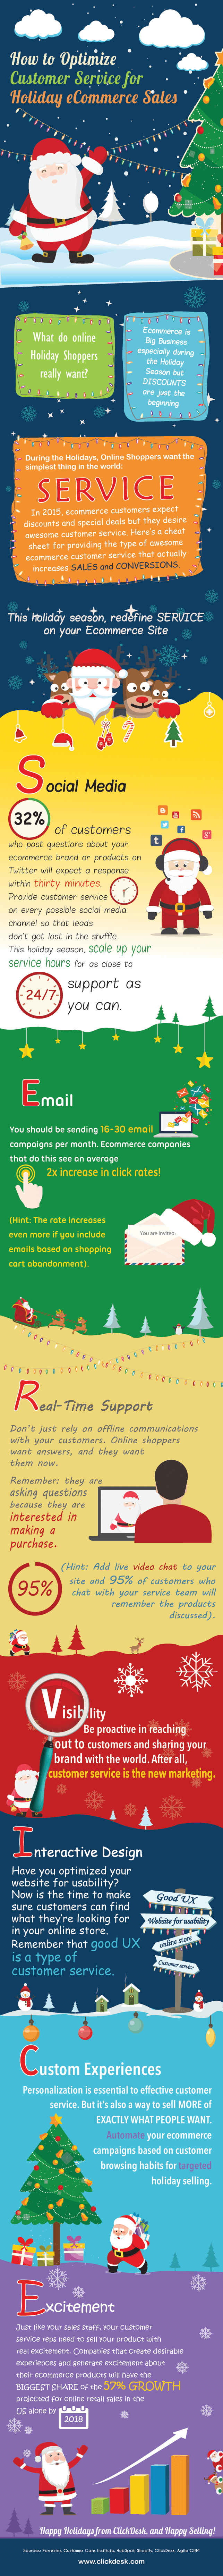 Holiday e-Commerce Sales